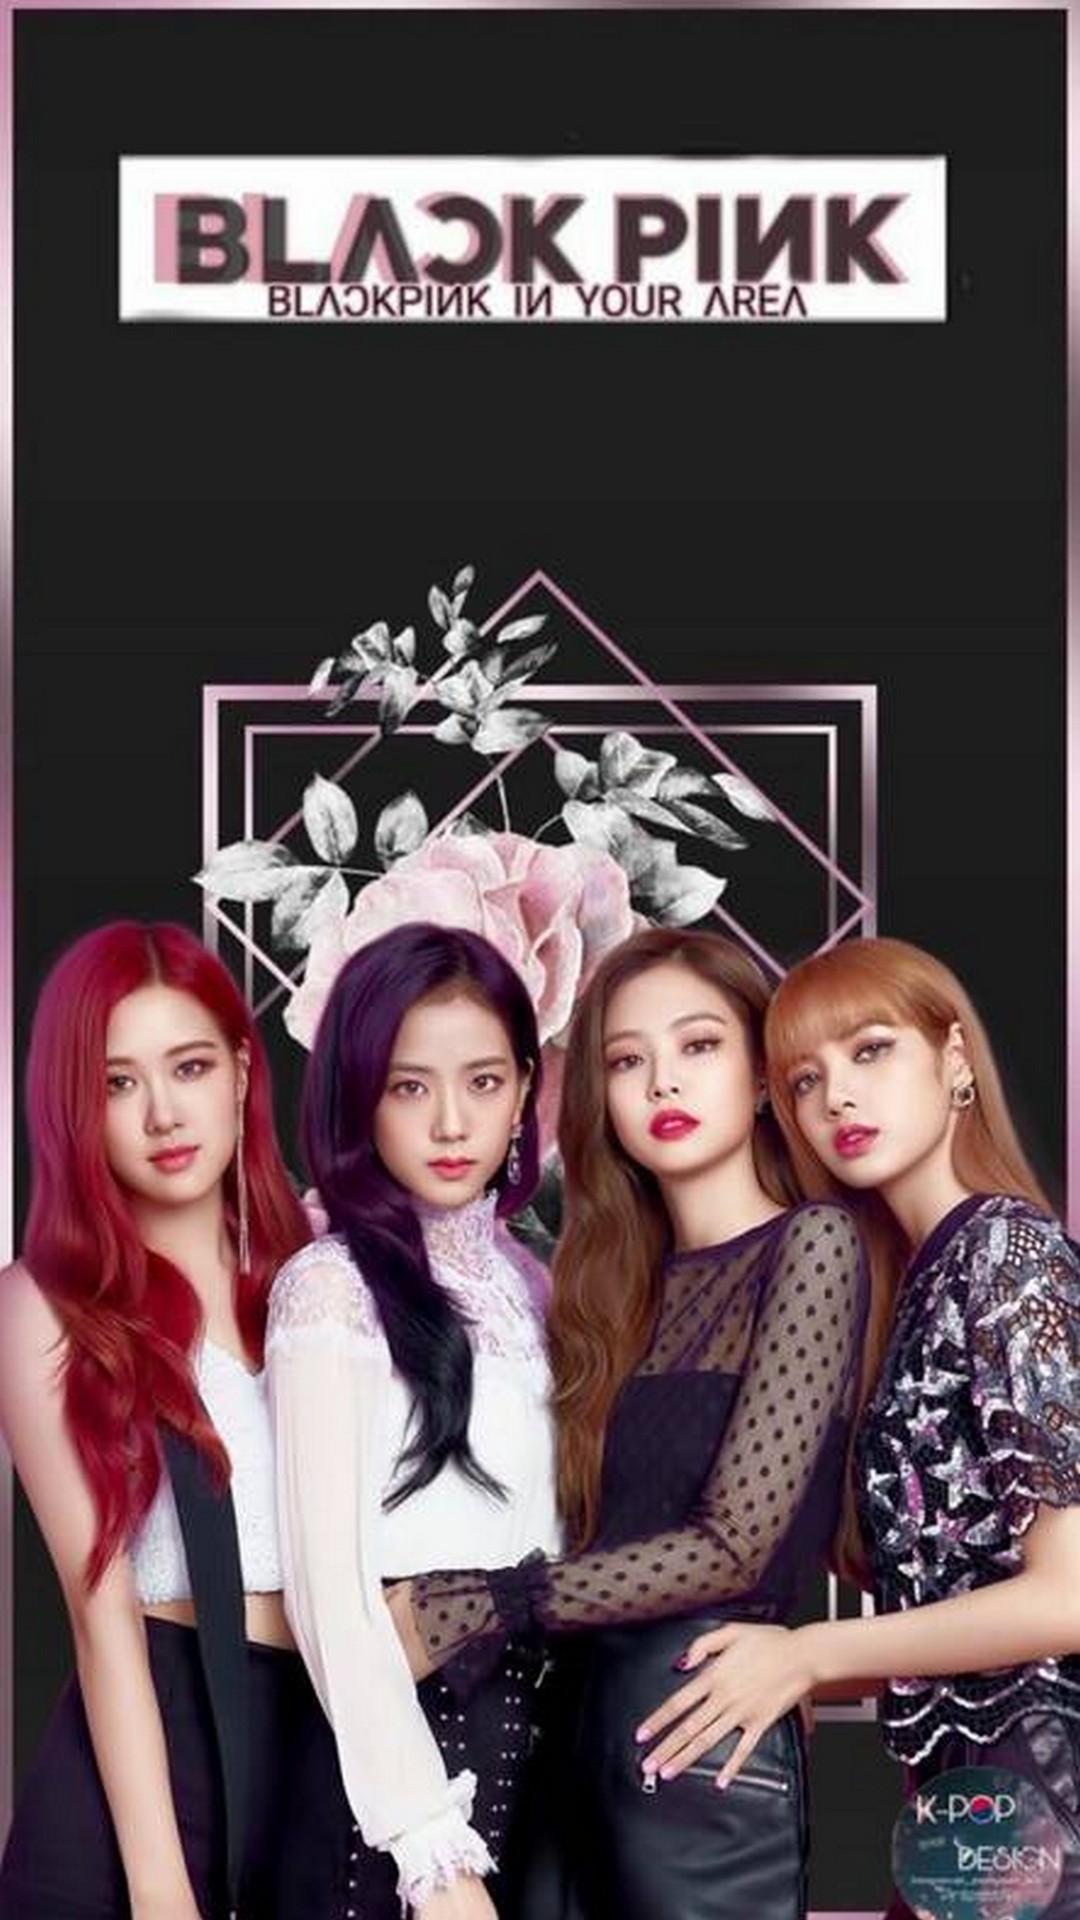 Blackpink iPhone 6 Wallpaper with high-resolution 1080x1920 pixel. You can use this wallpaper for your iPhone 5, 6, 7, 8, X, XS, XR backgrounds, Mobile Screensaver, or iPad Lock Screen